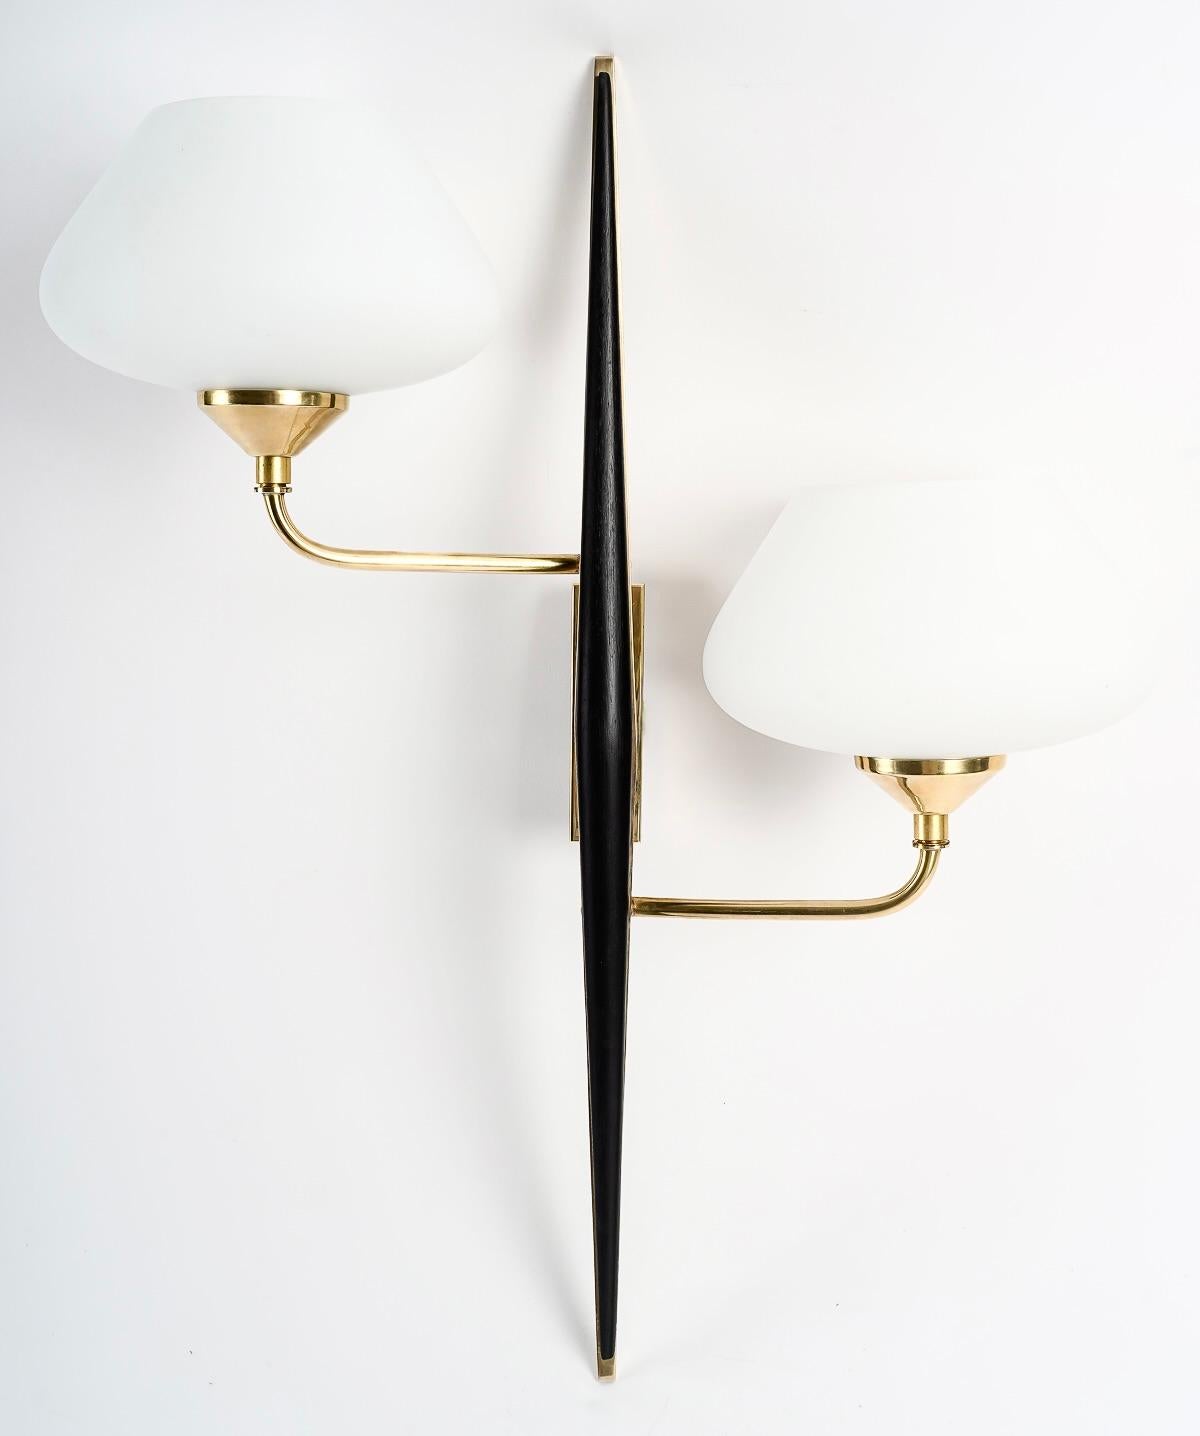 Composed of a central stem in the shape of a spindle in gilded brass, decorated in front of a spindle in blackened wood.
From the rectangular wall support placed at the back of the sconce, two arms of light start, they are placed in asymmetry on